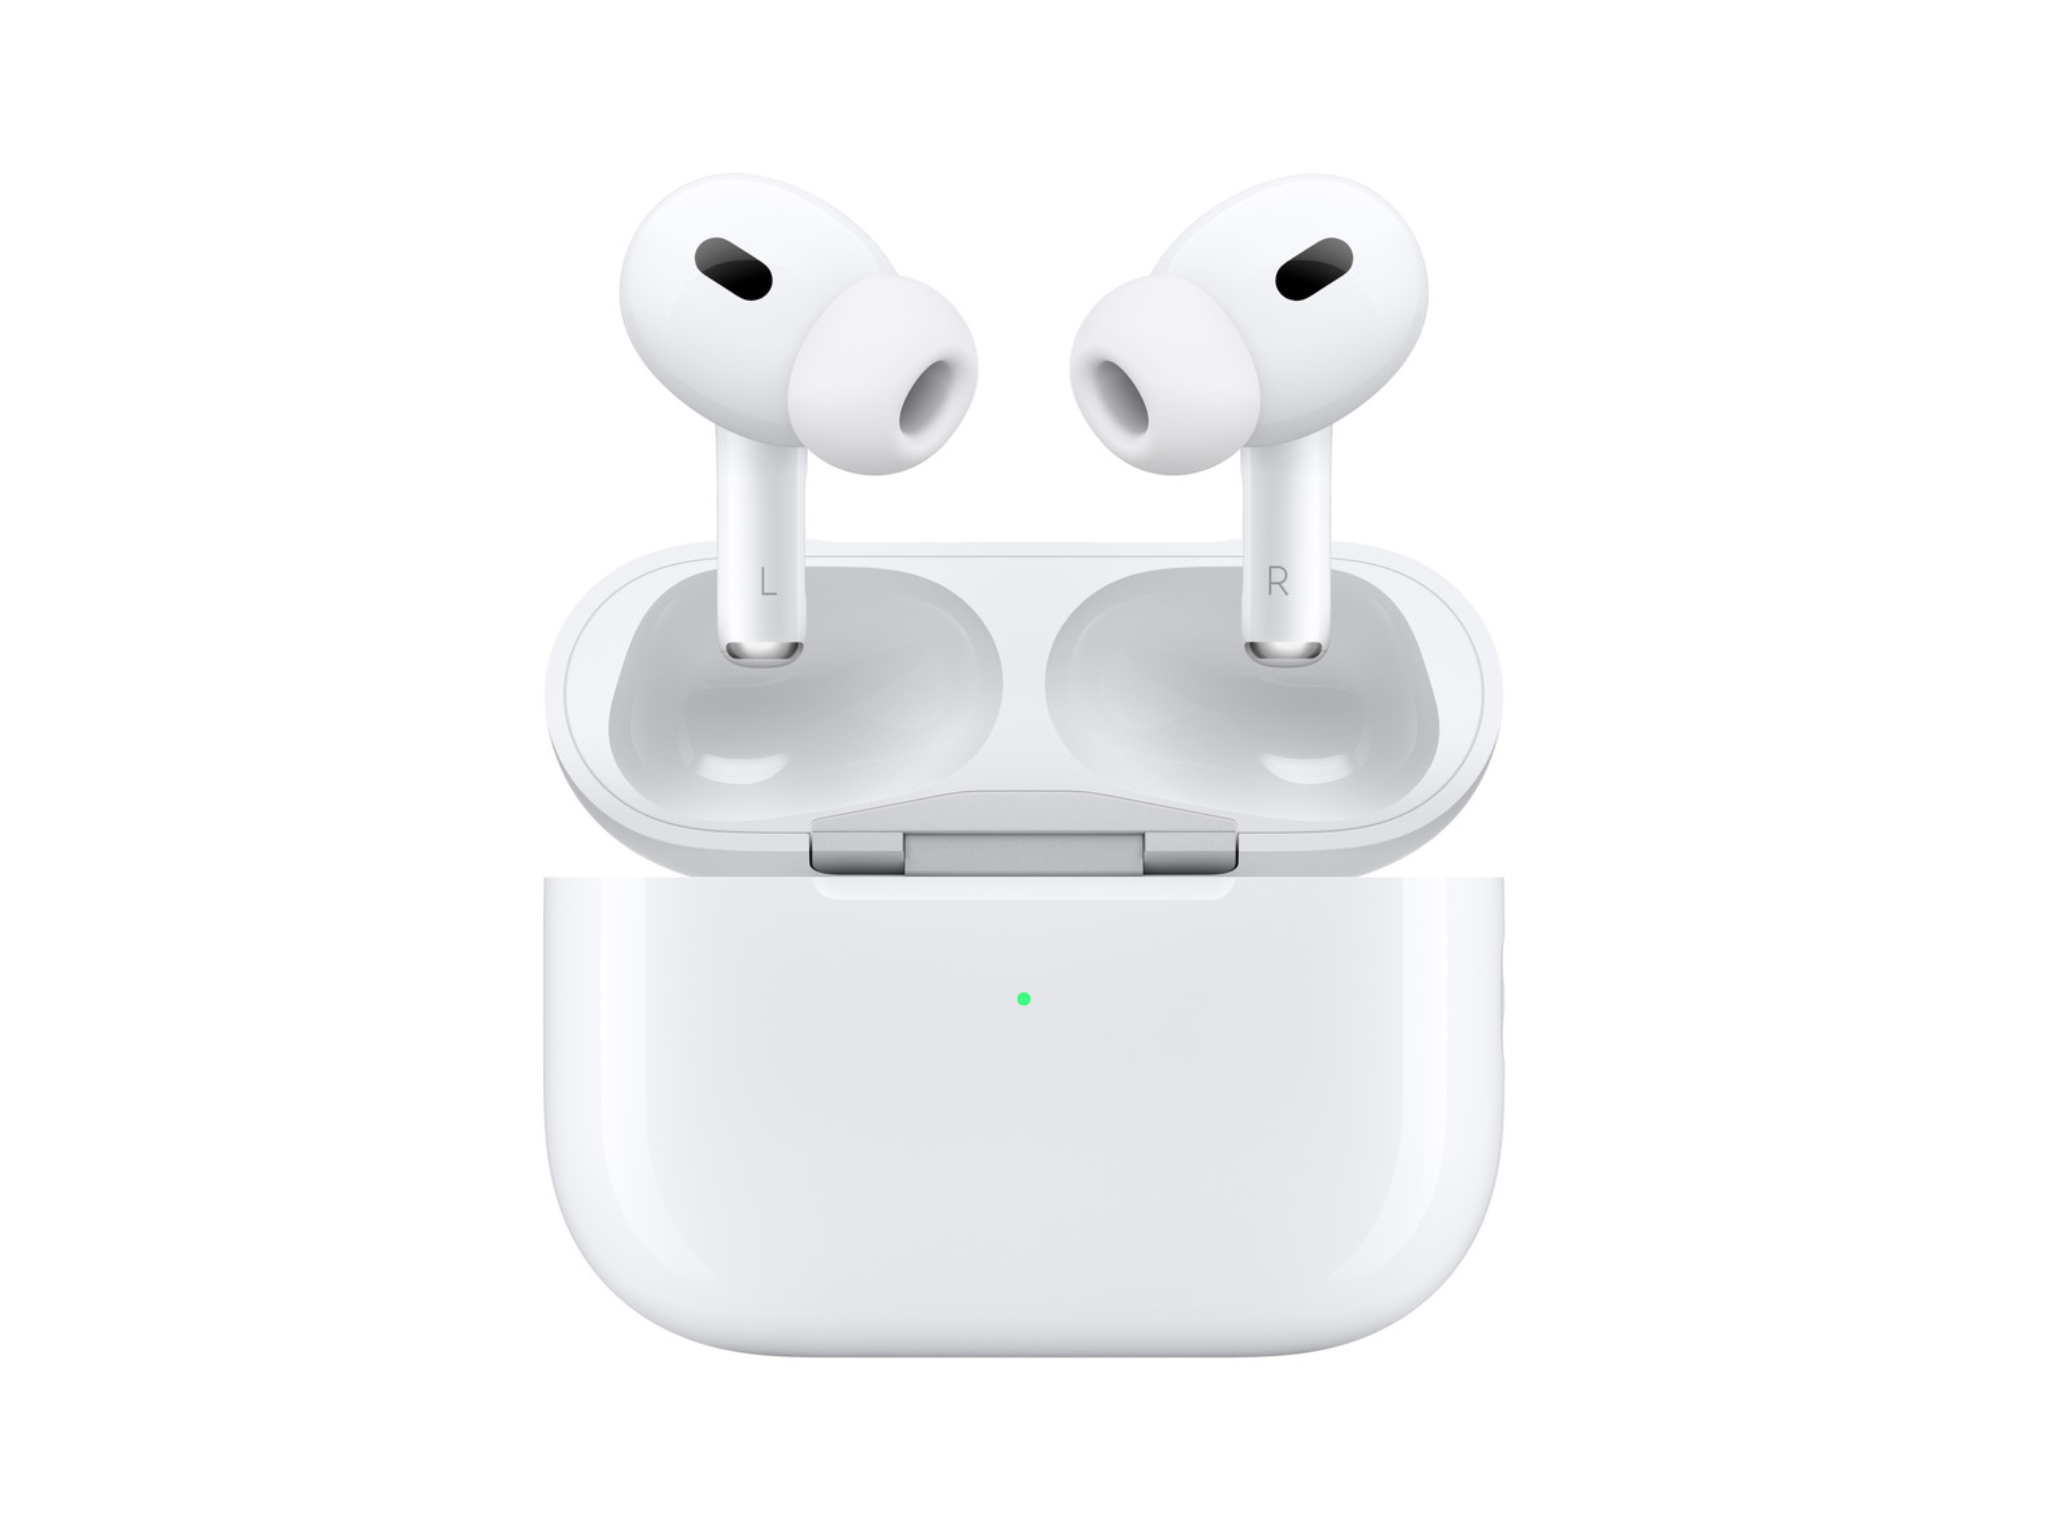 apple, deals, black friday, indybest, amazon, black friday, the best apple cyber monday deals on airpods, ipads and more